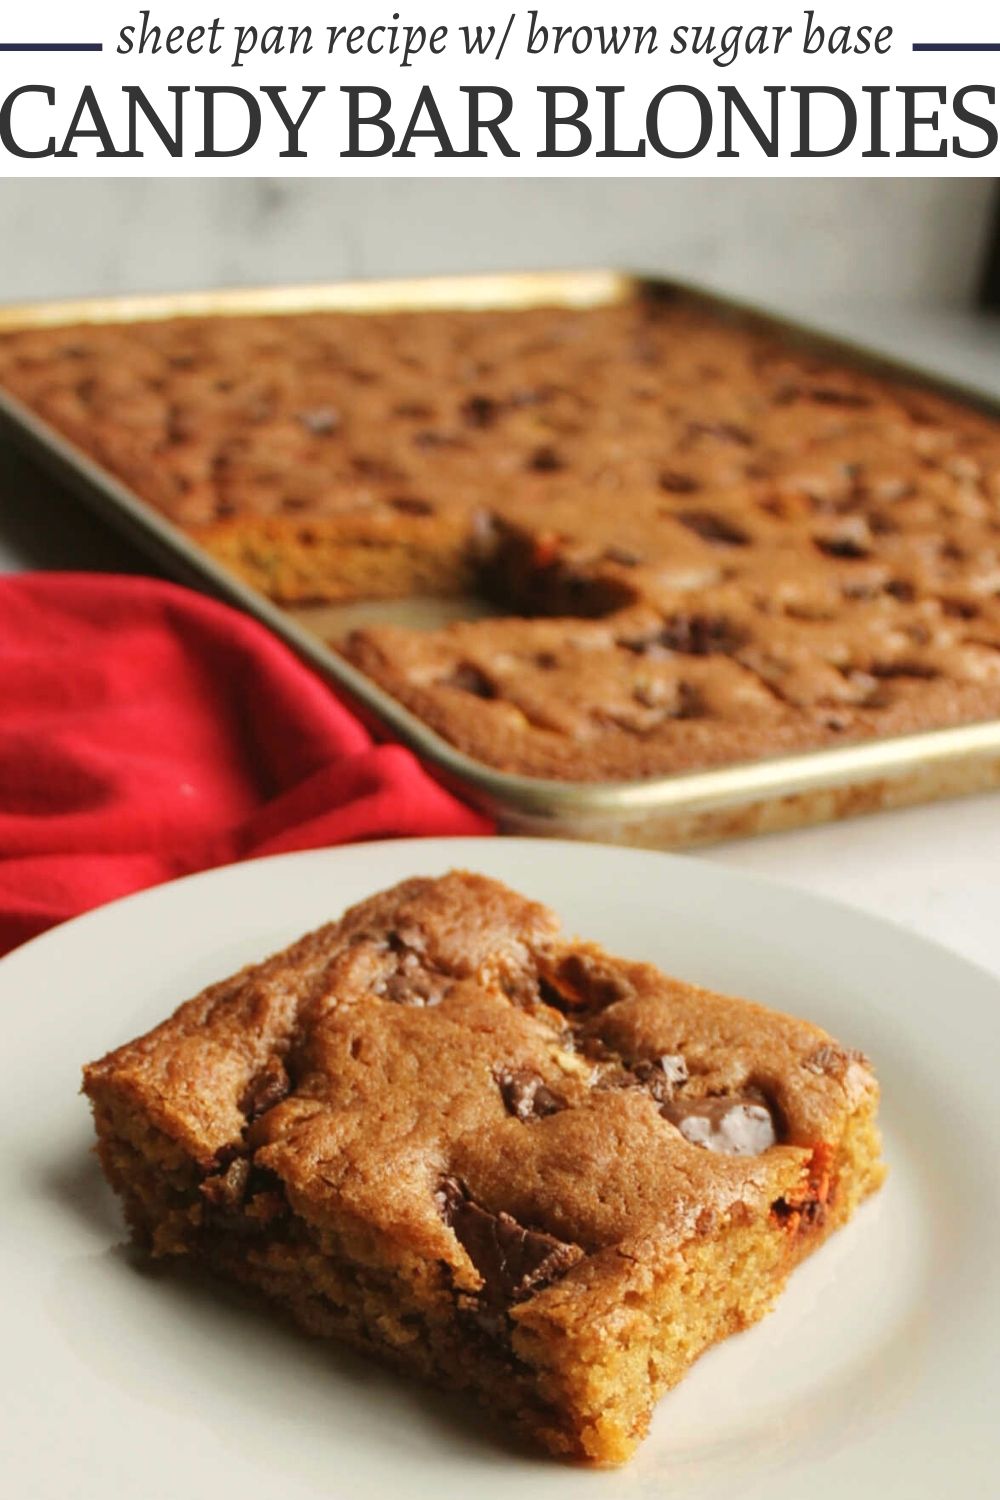 Turn extra candy bars into something delicious with these brown sugar blondies. They are chewy, delicious, and it makes a sheet pan full so there are plenty to share. This recipe is so easy to make and they taste great.